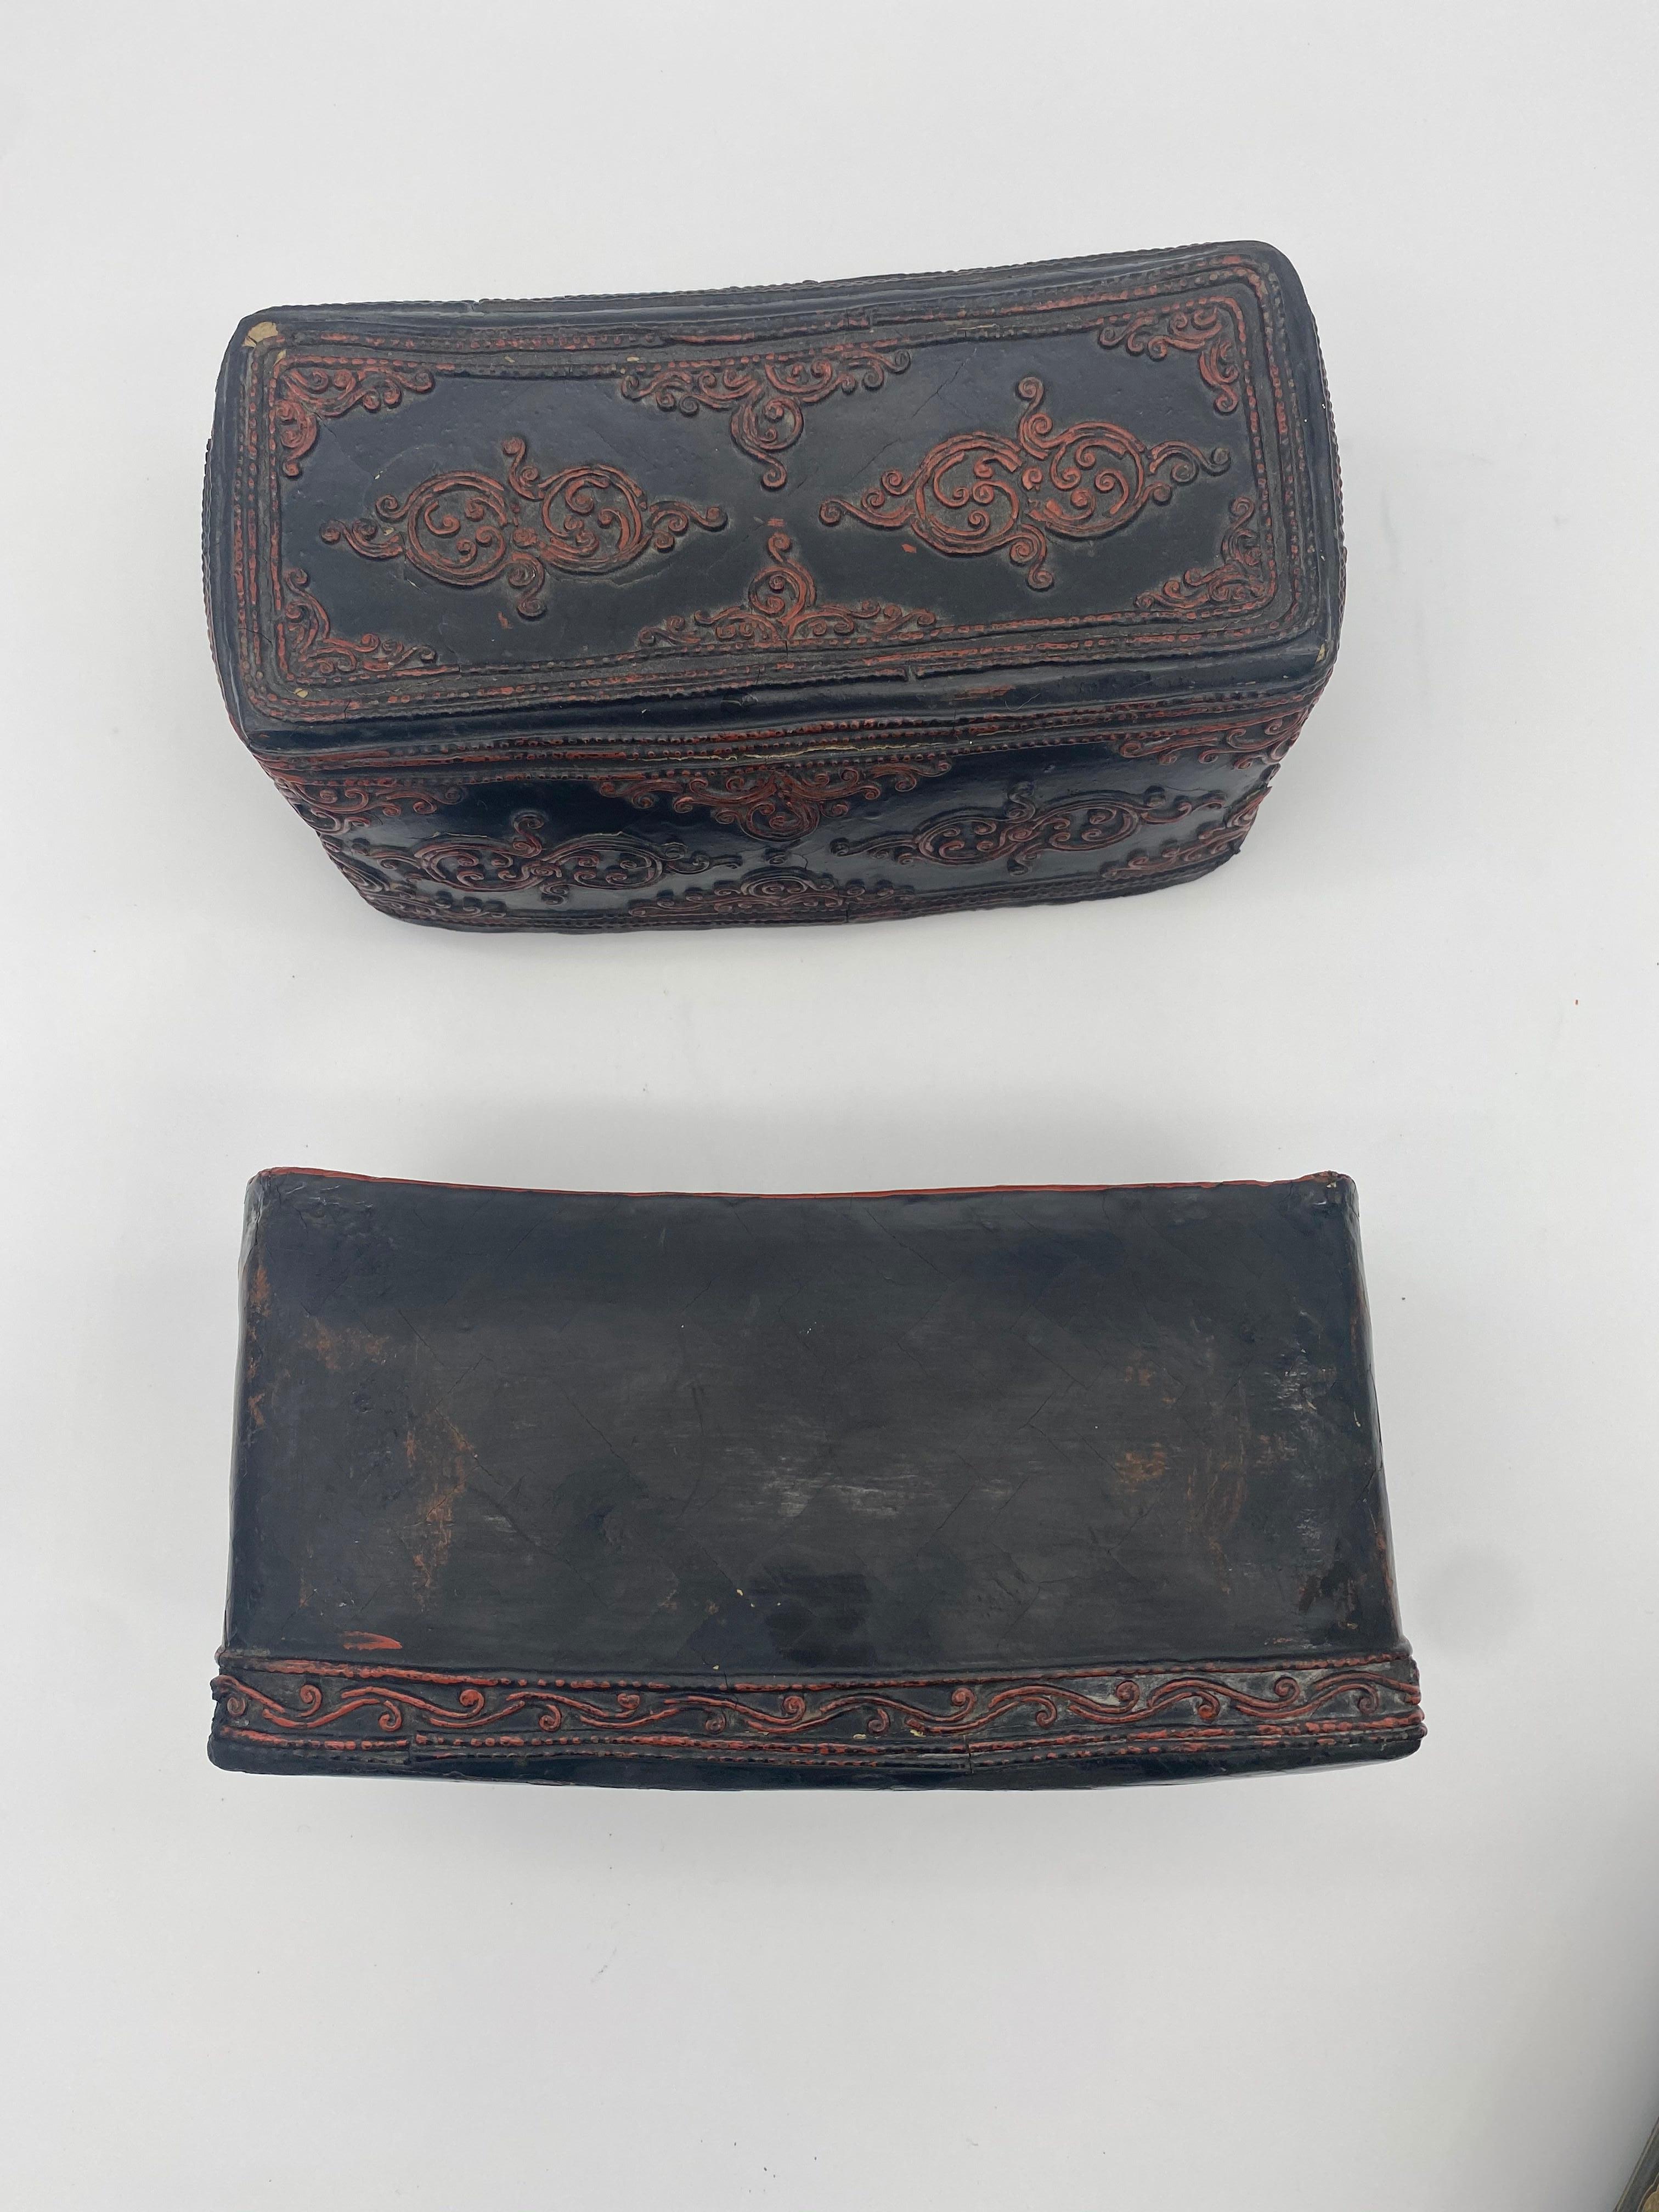 18th Century Burmese Rakhine State Lacquer Bamboo Pillow Box In Good Condition For Sale In Brea, CA